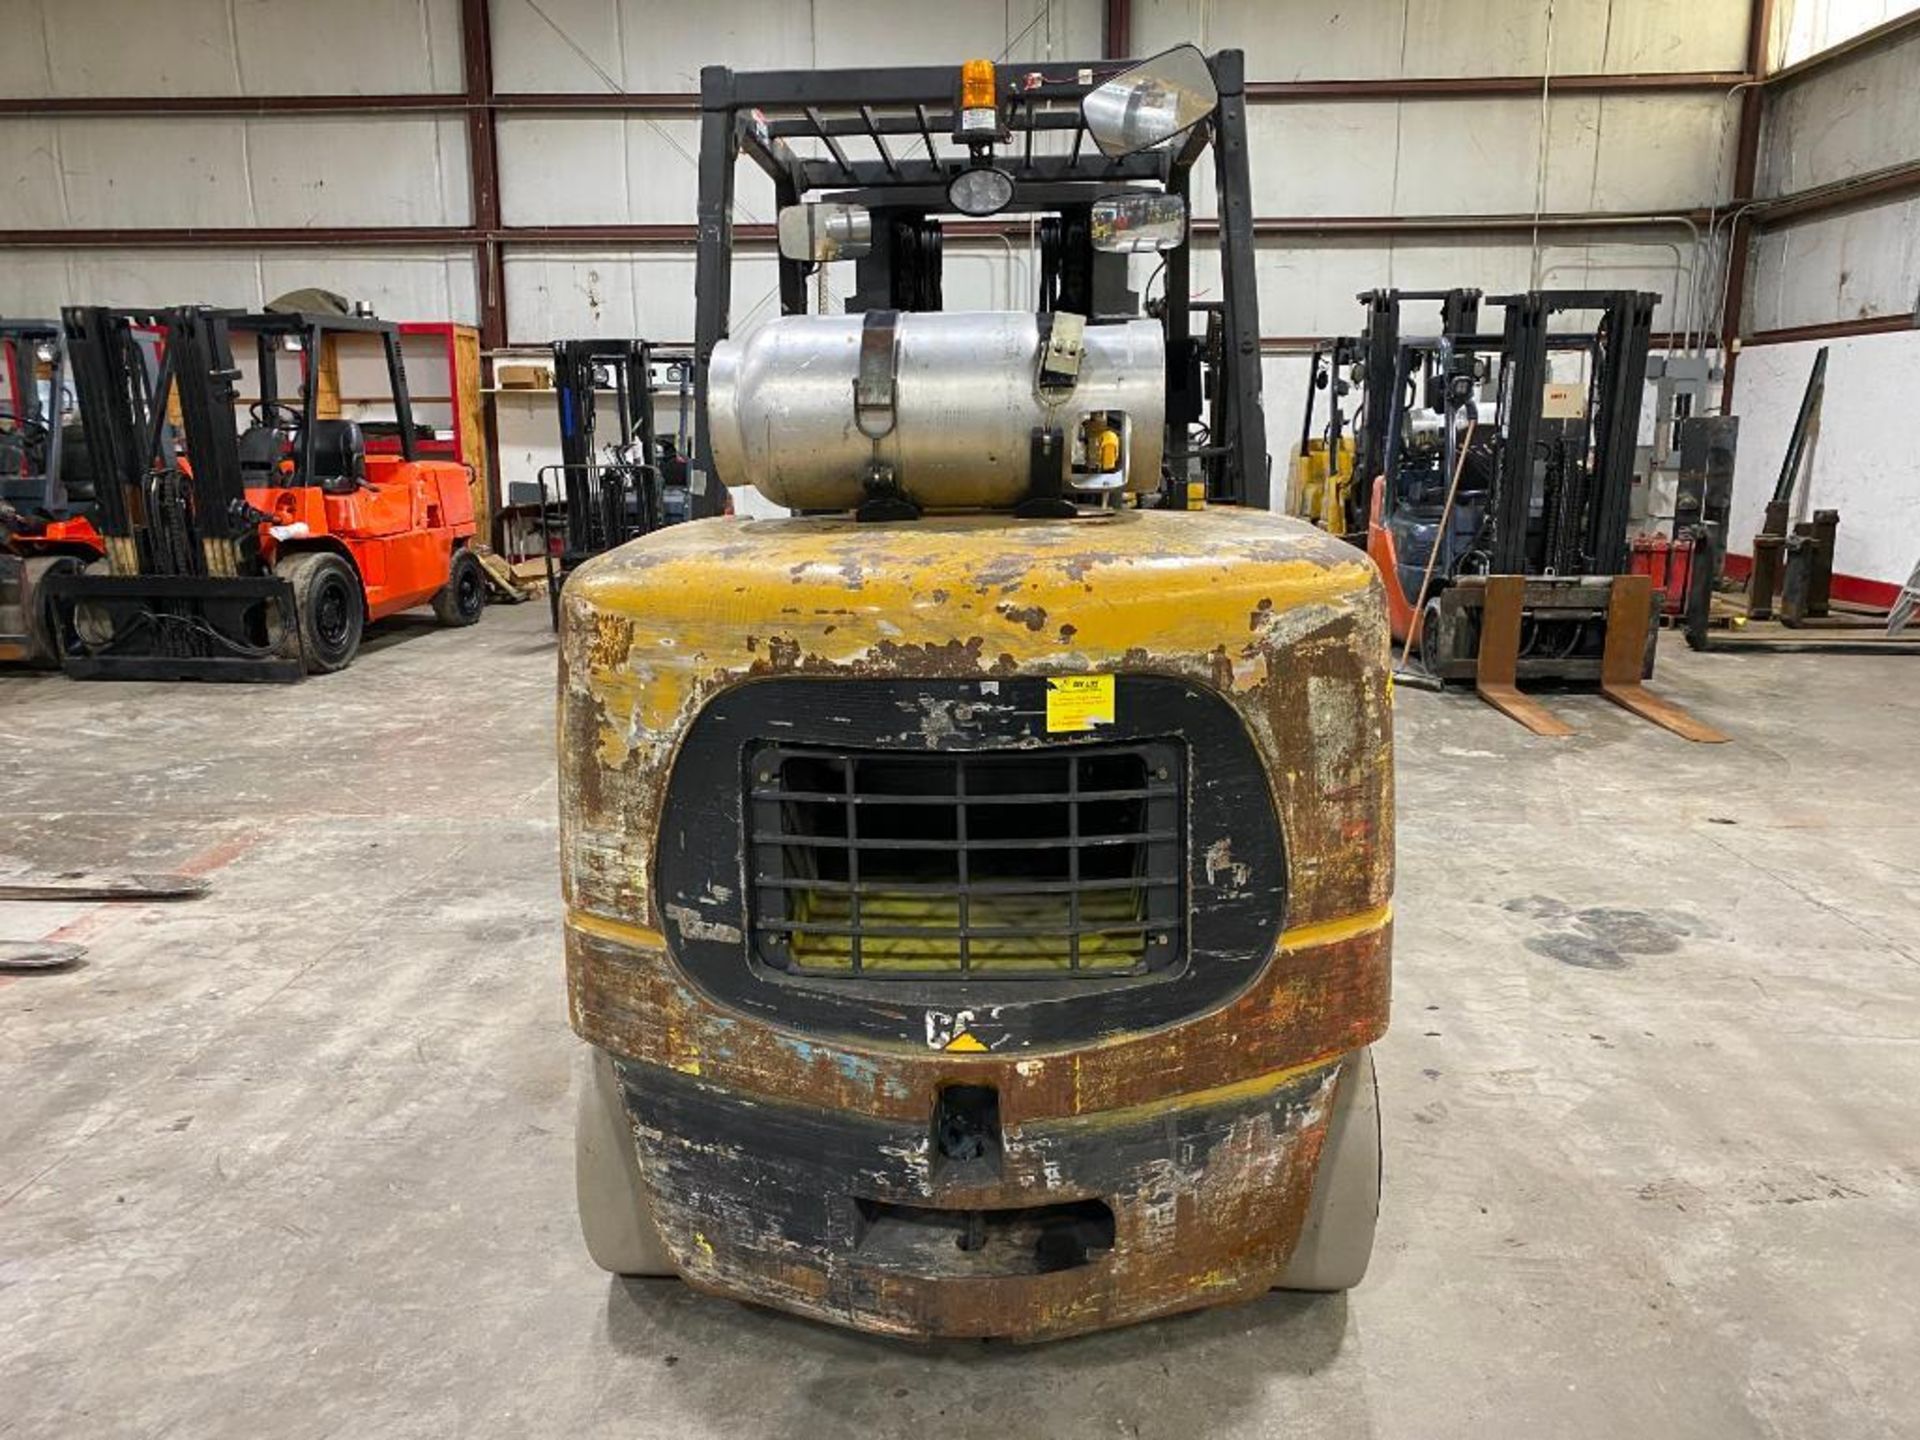 Caterpillar 13,500-LB. Capacity Forklift, Model GC60K, S/N AT8900875, LPG, Cushion Tires, 3-Stage Ma - Image 4 of 5